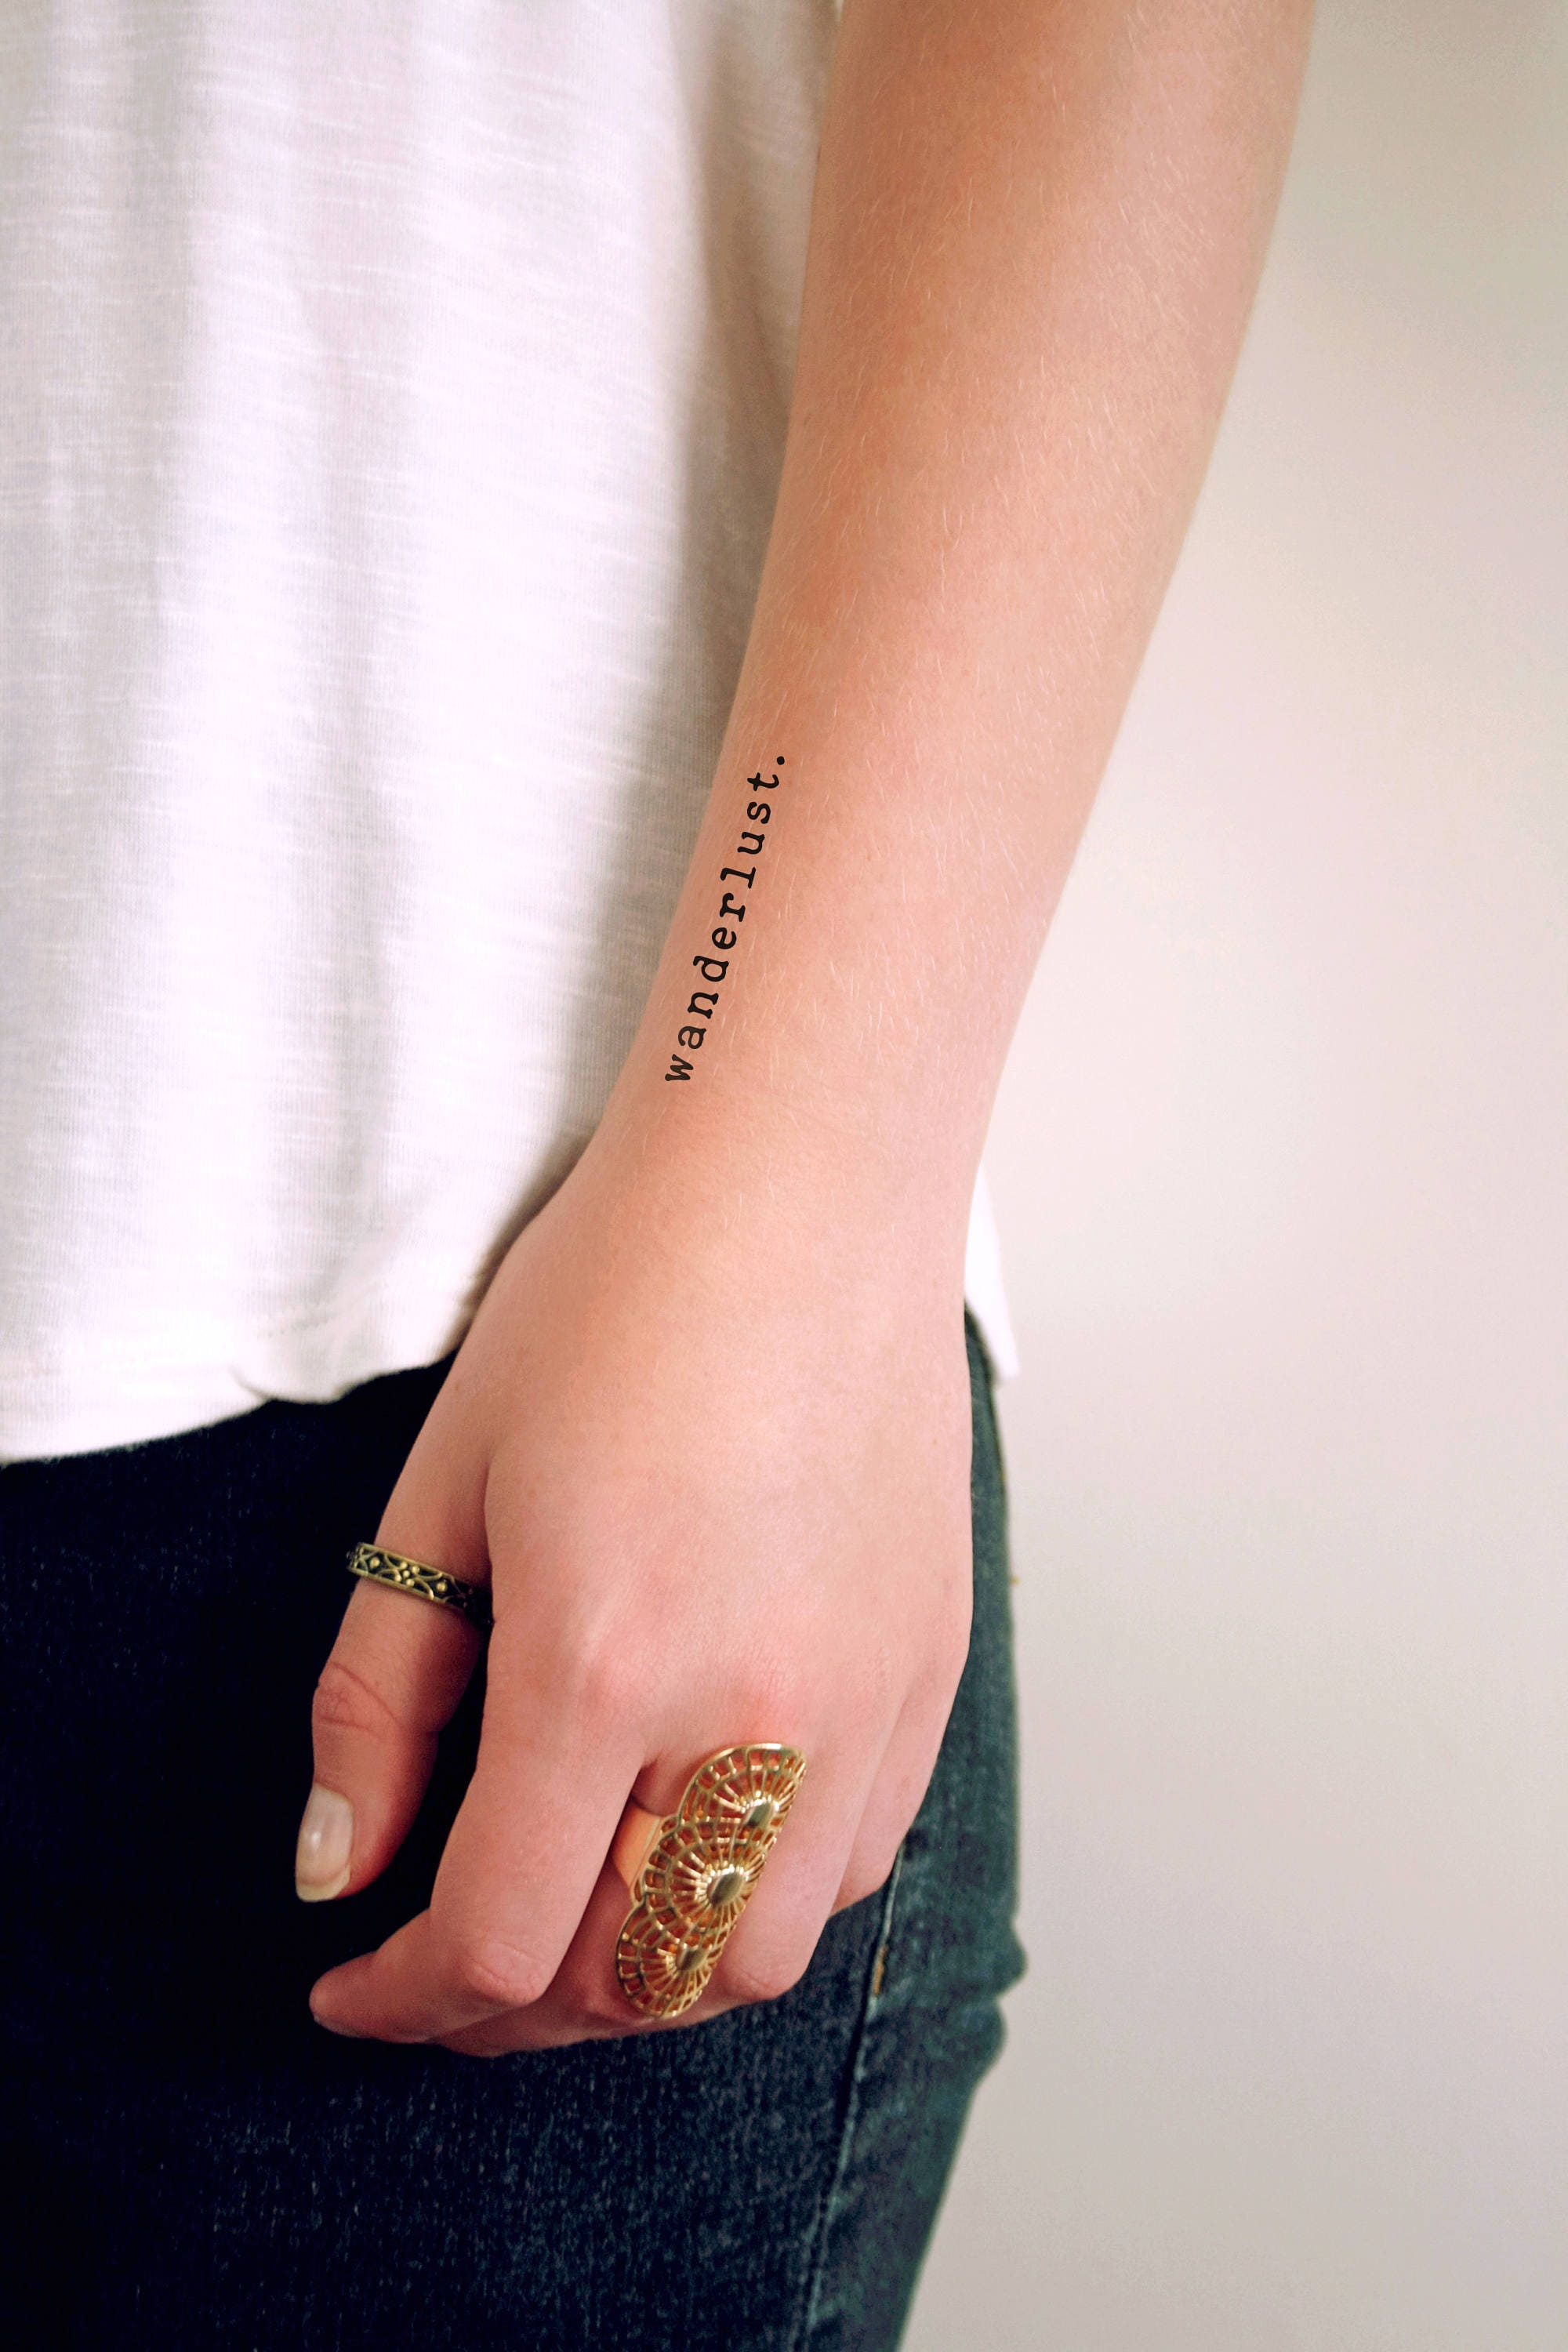 List of Two Word Quotes for Tattoos  Thoughtful Tattoos